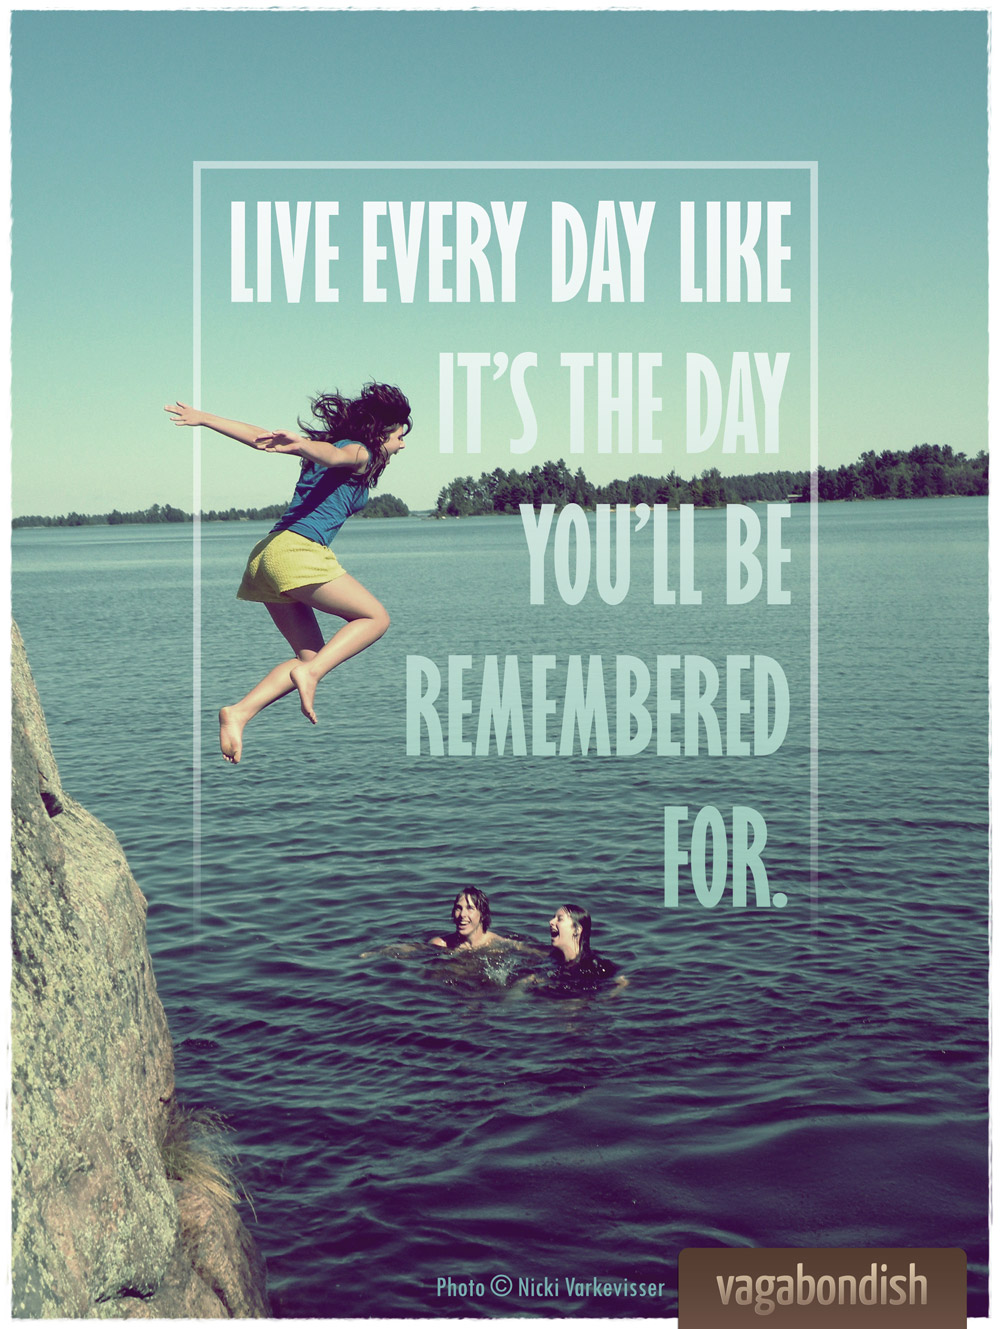 Travel Quote: "Live every day like it's the day you'll be remembered for."